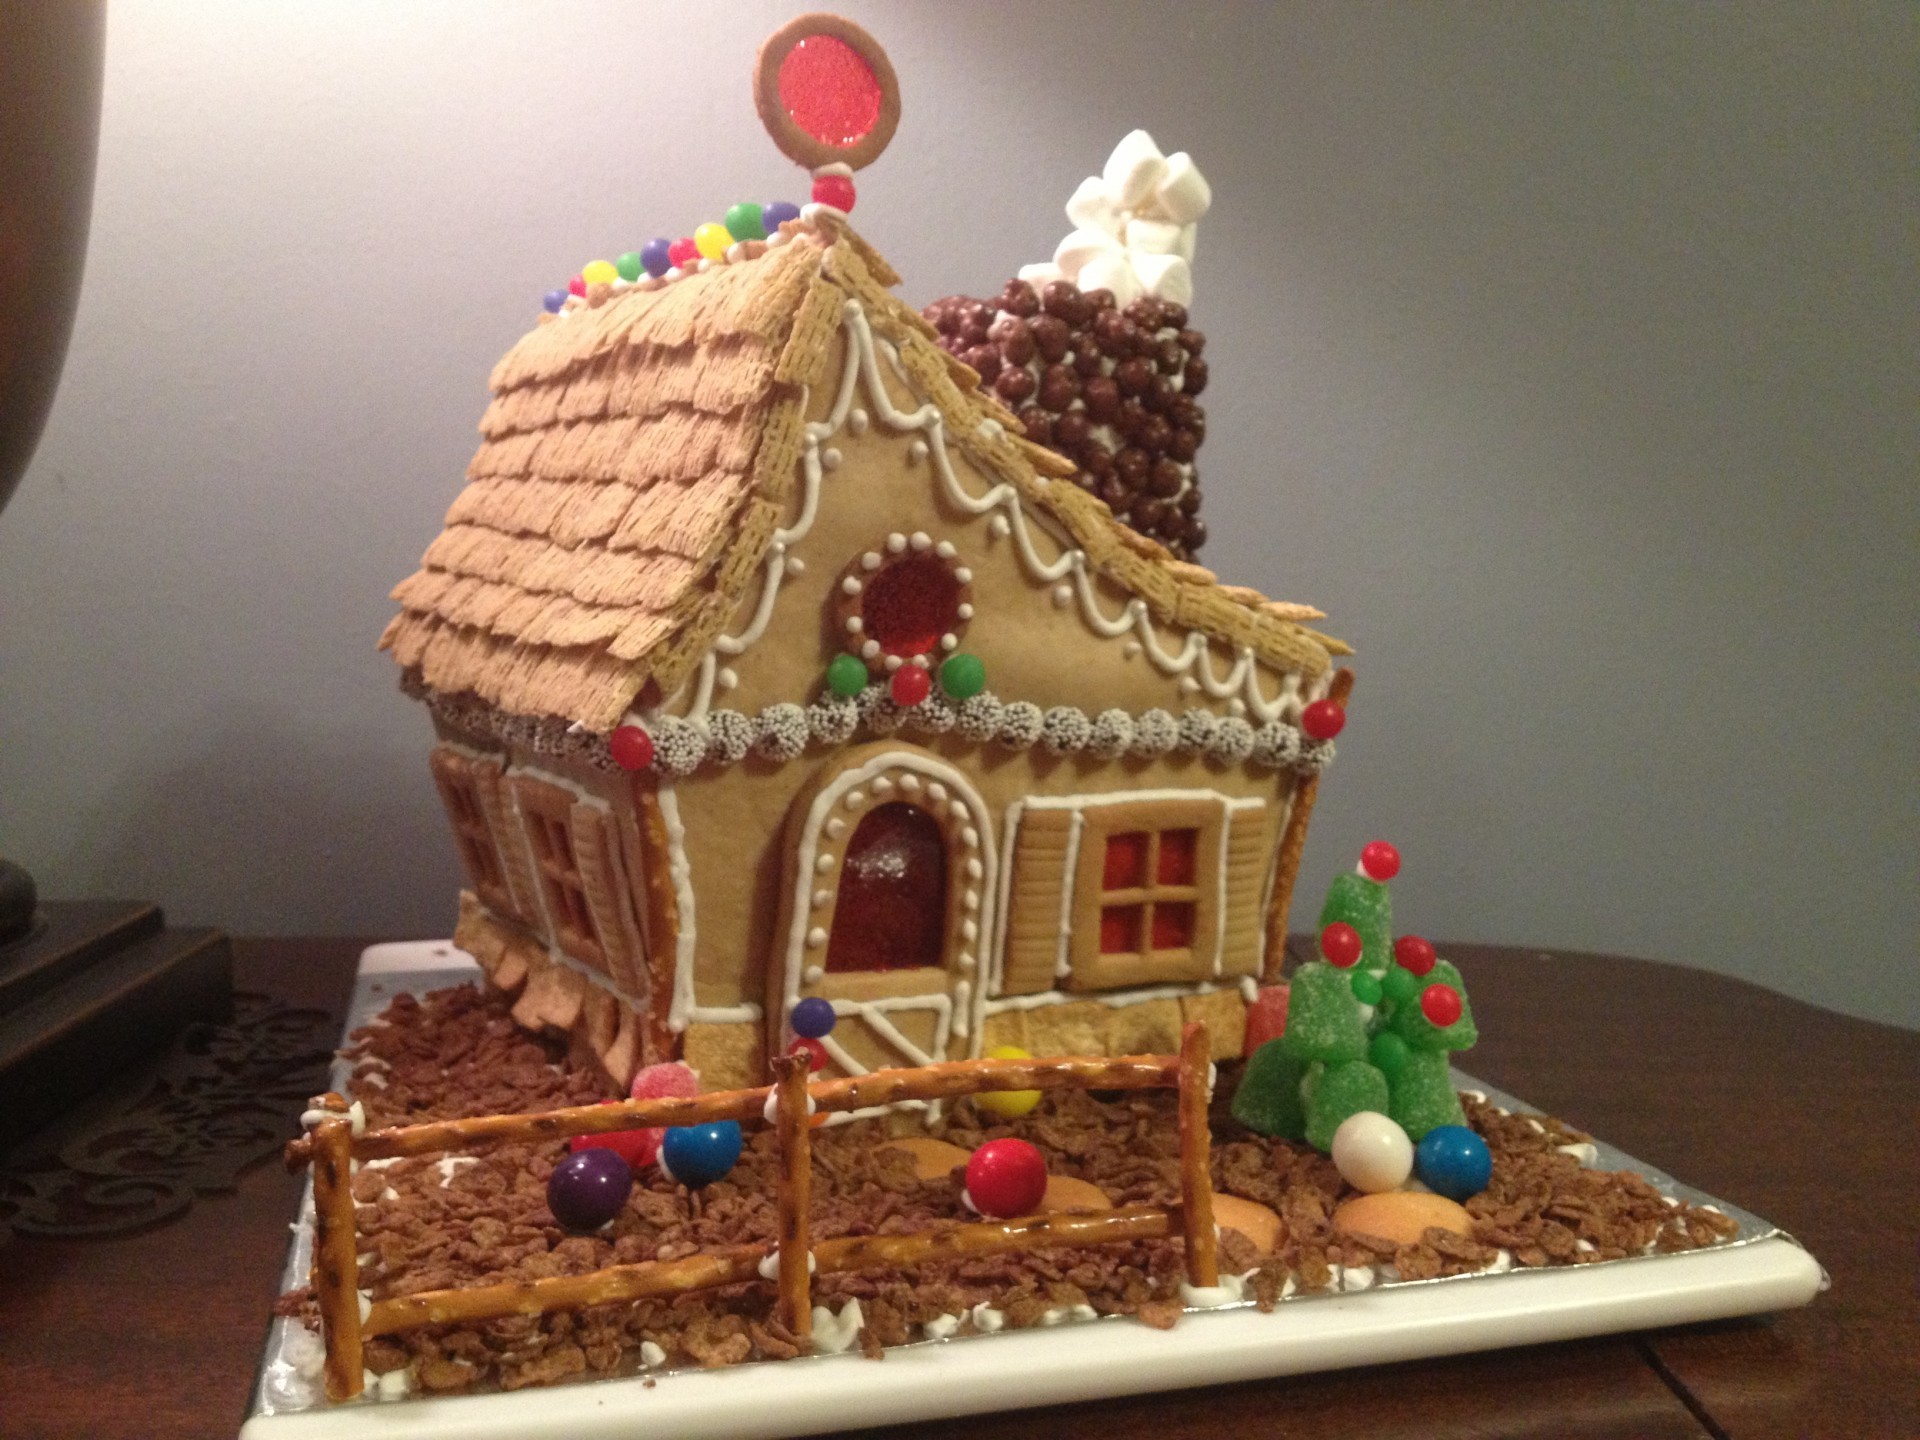 1920x1440 Gingerbread House Tips – Construction to Decoration